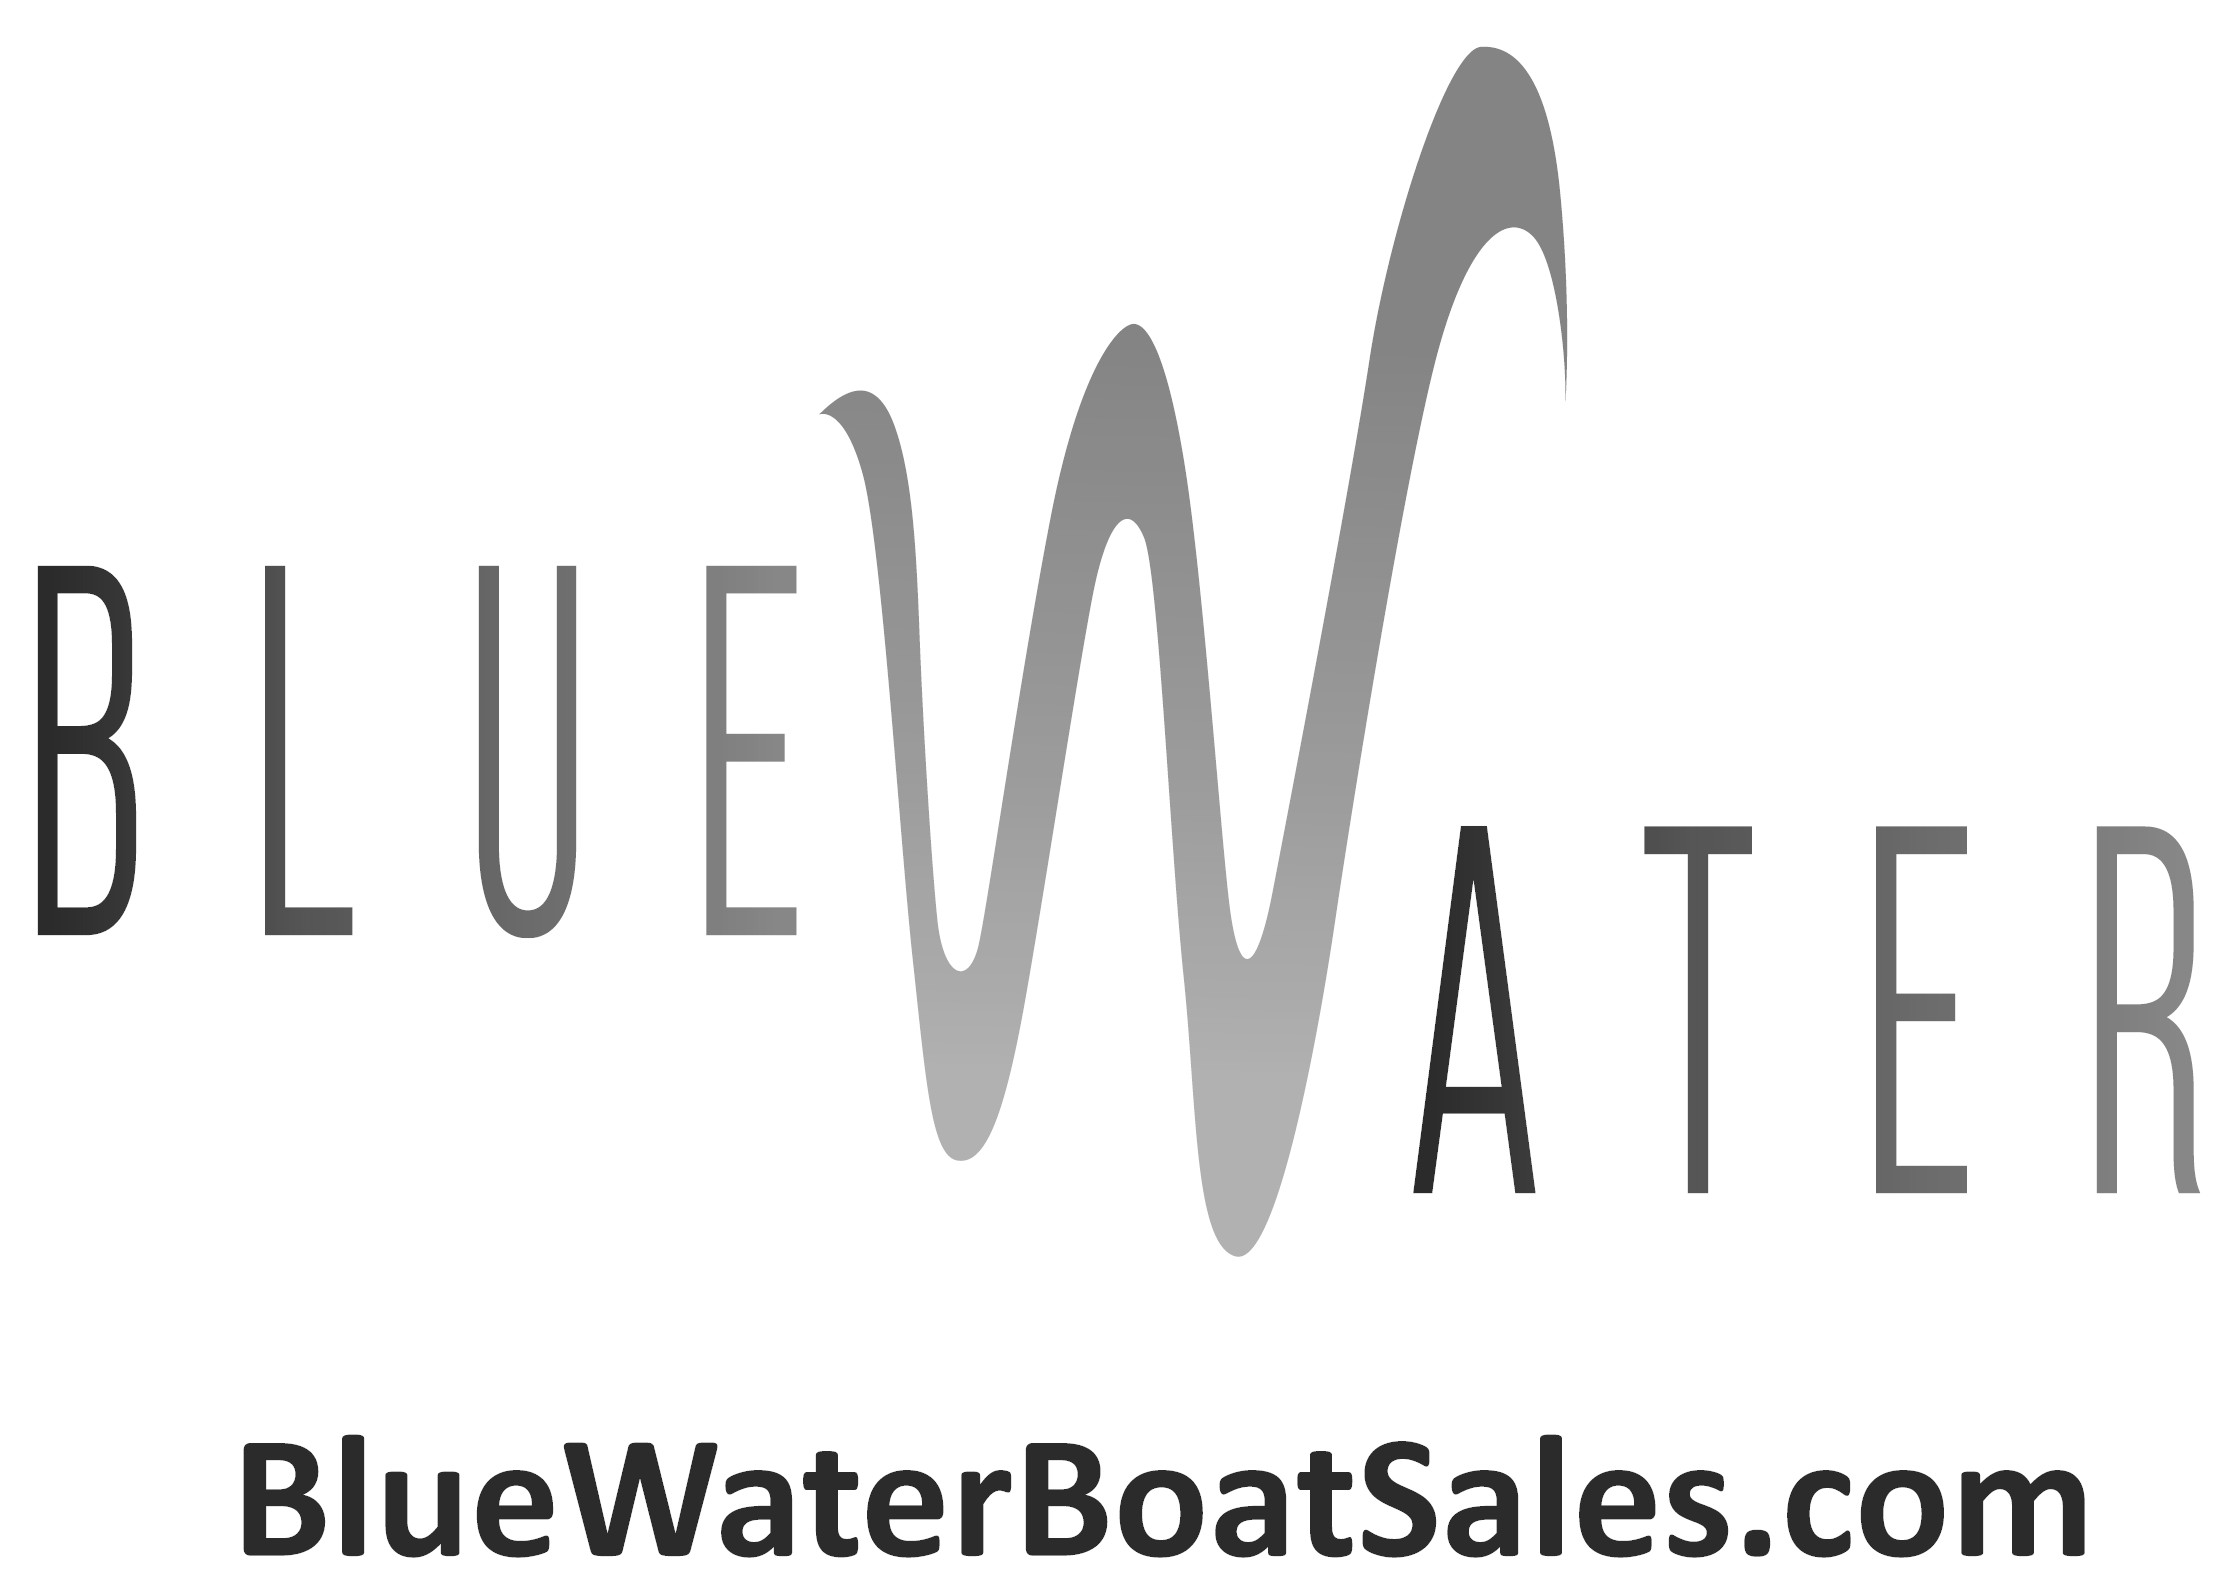 BlueWater Boat Sales